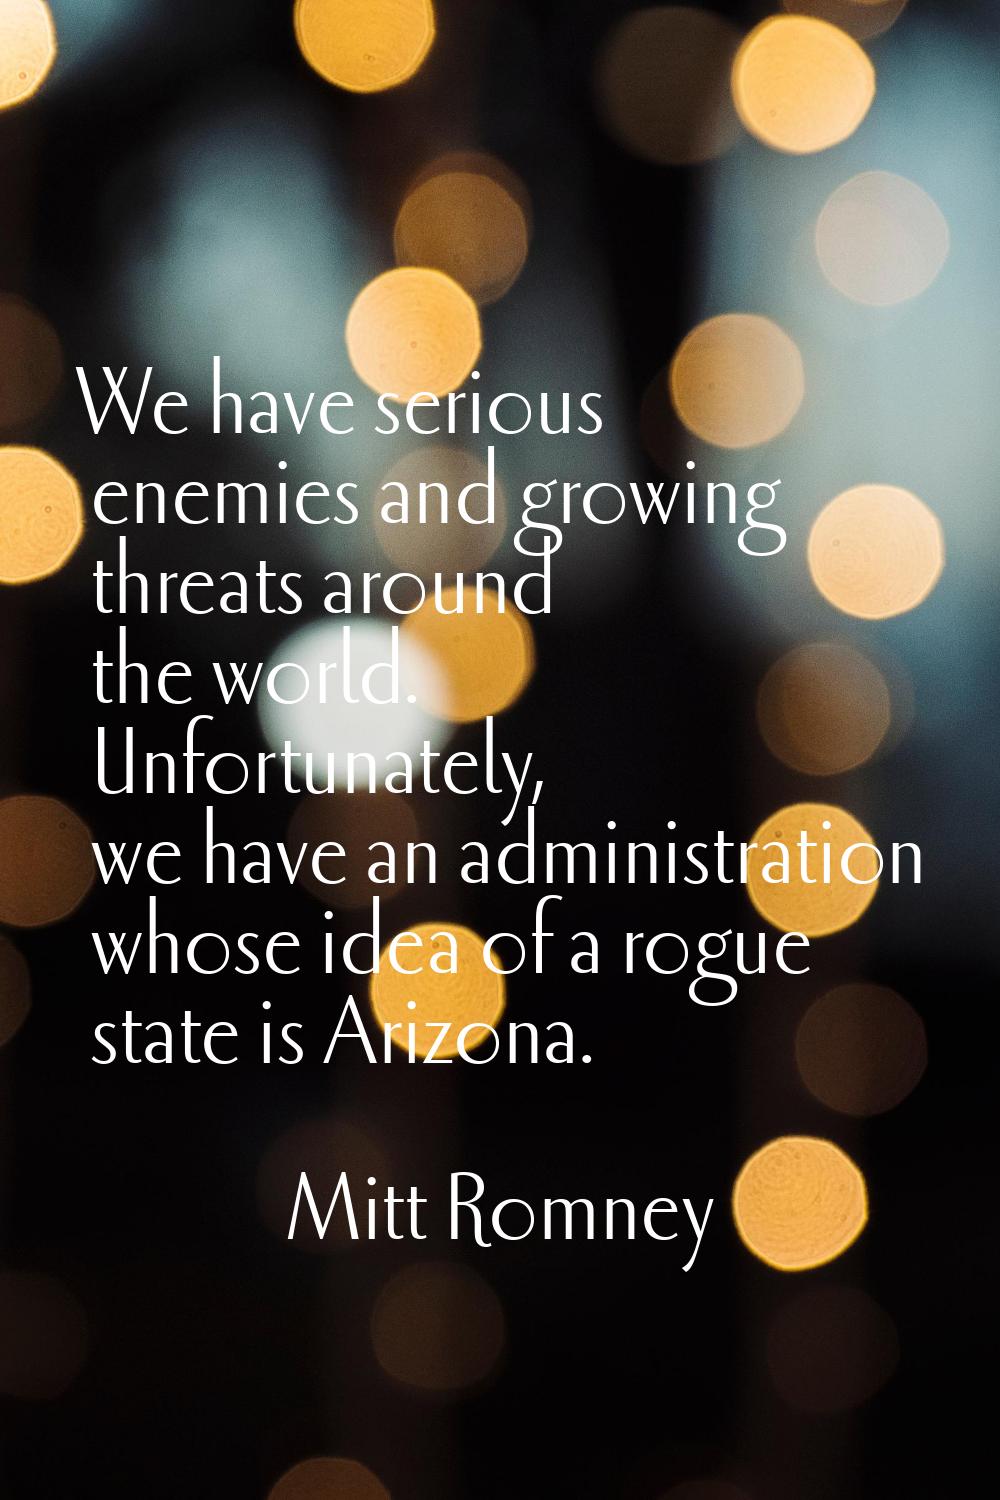 We have serious enemies and growing threats around the world. Unfortunately, we have an administrat